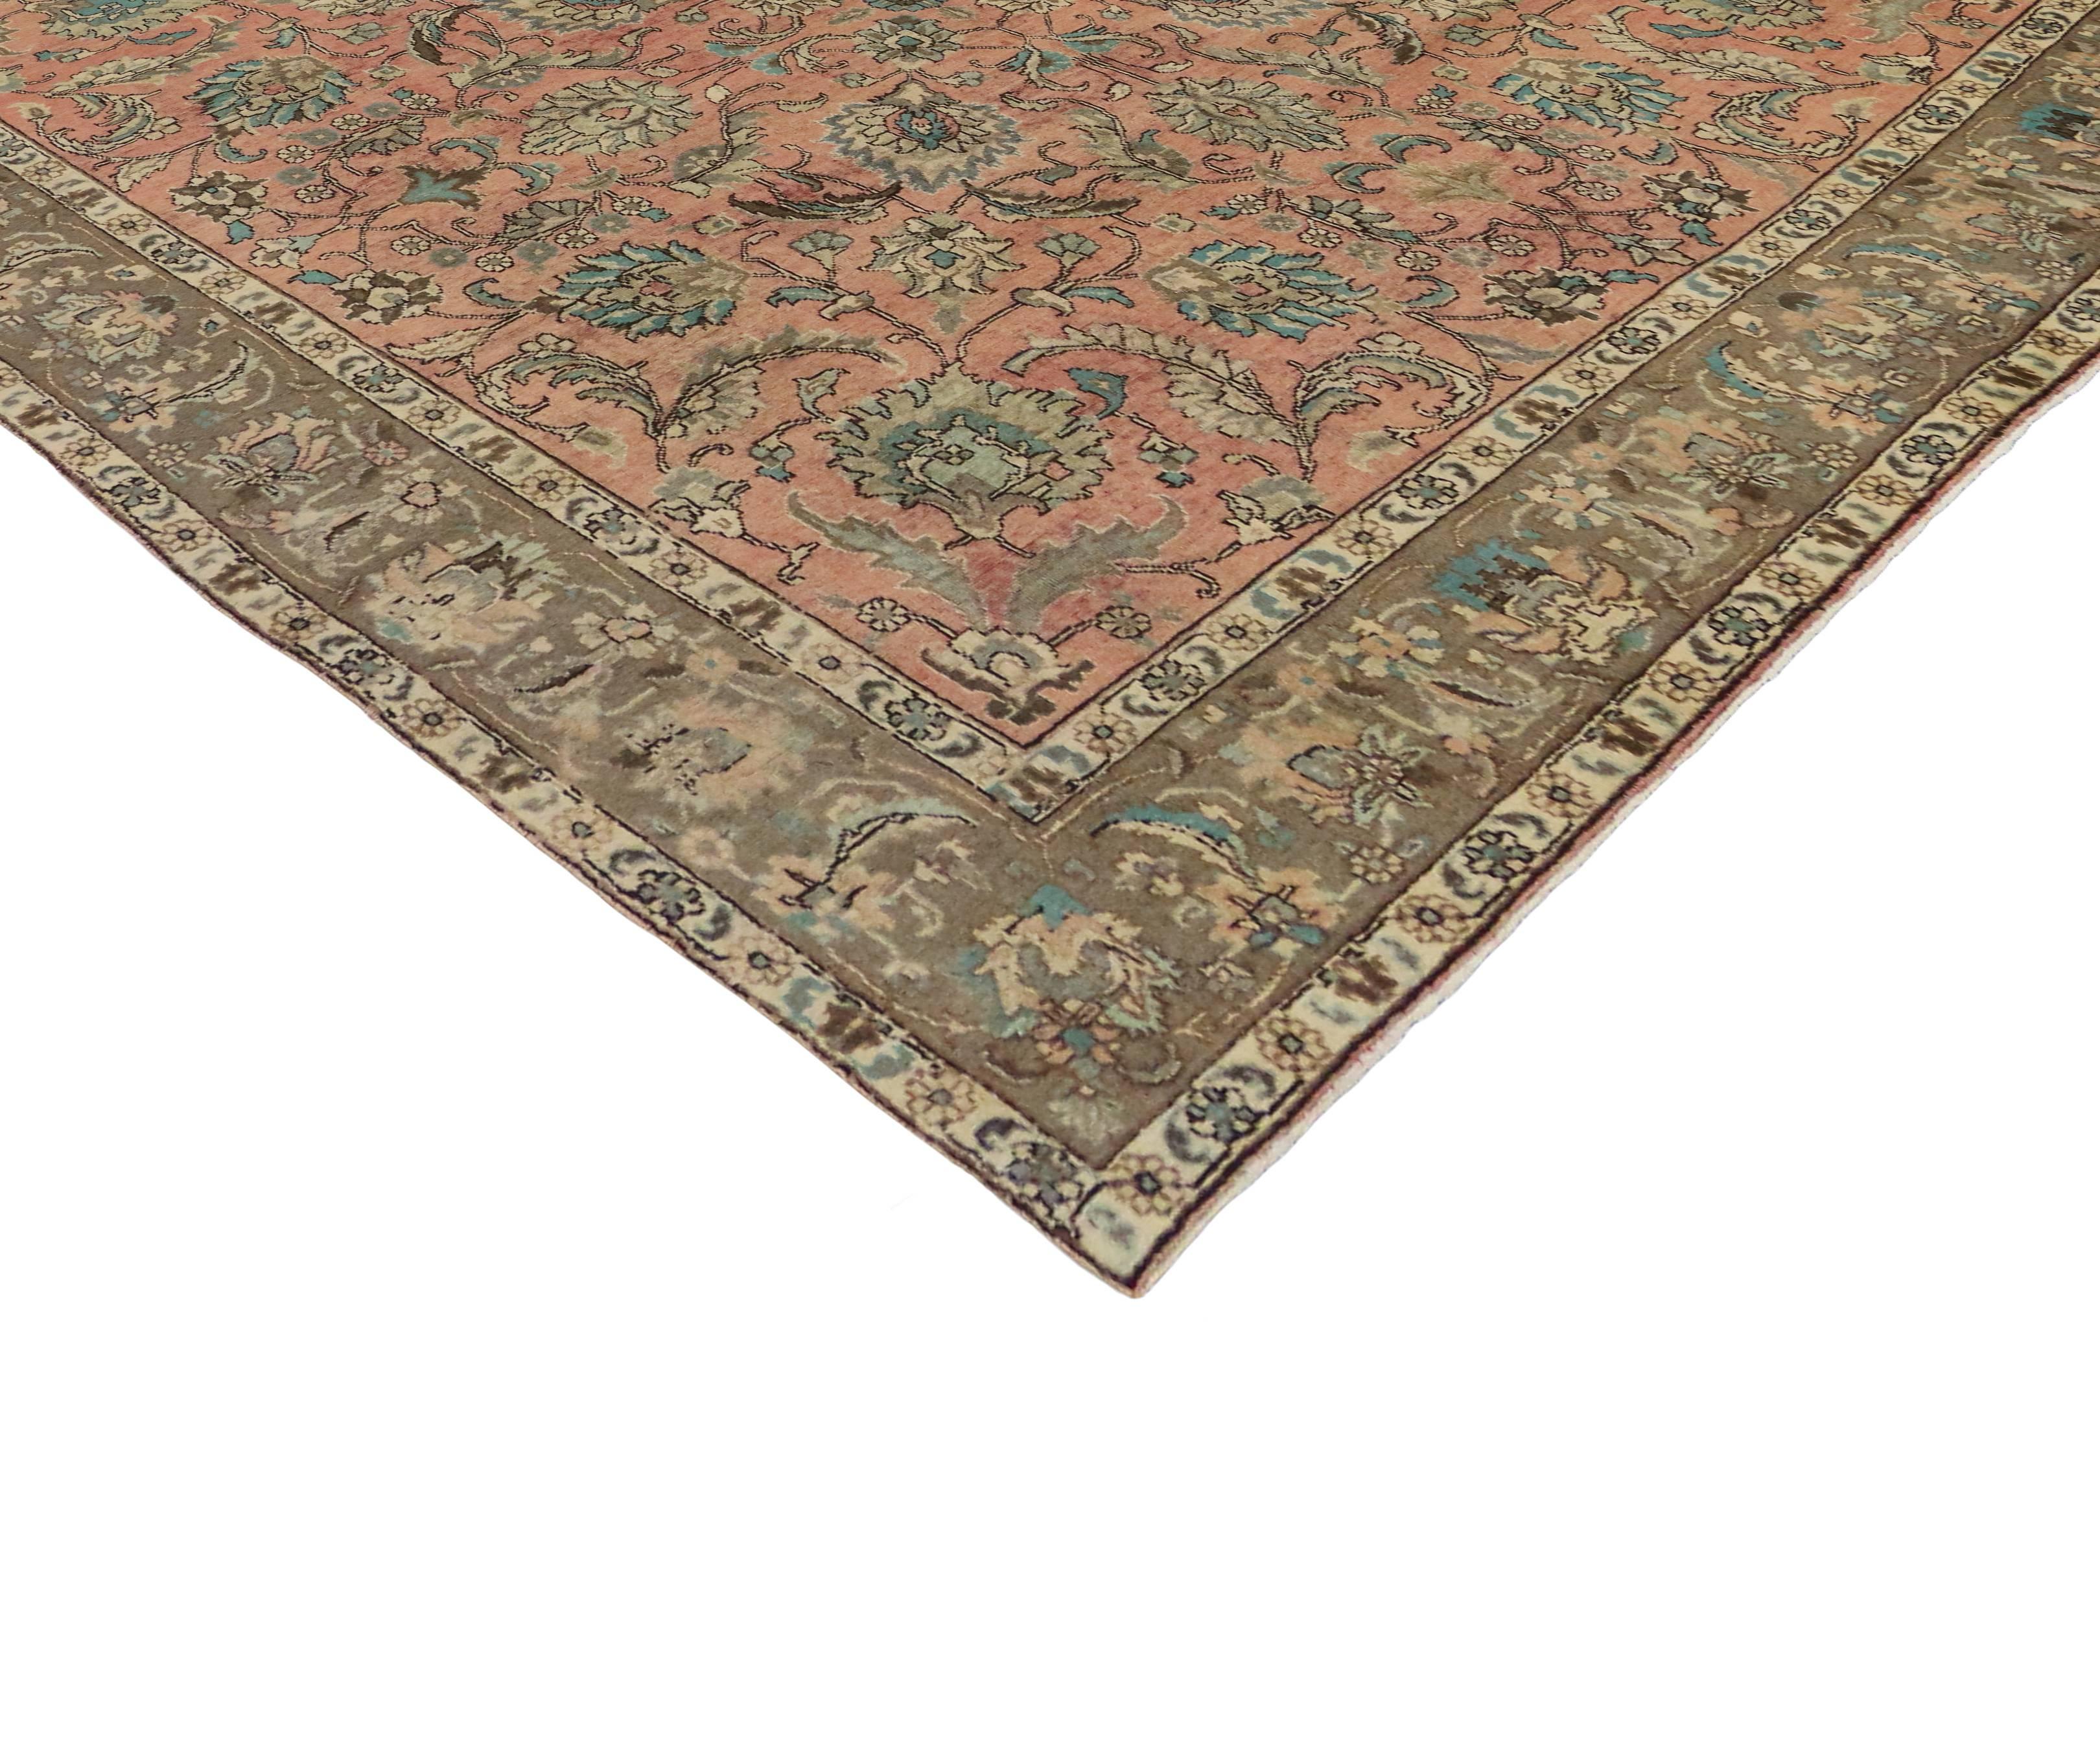 Embodying the highly decorative aesthetic, this vintage Persian Tabriz rug displays a traditional style in light colors. Featuring a tastefully casual presence and sophisticated chic style, the all-over geometric pattern resonates an astounding